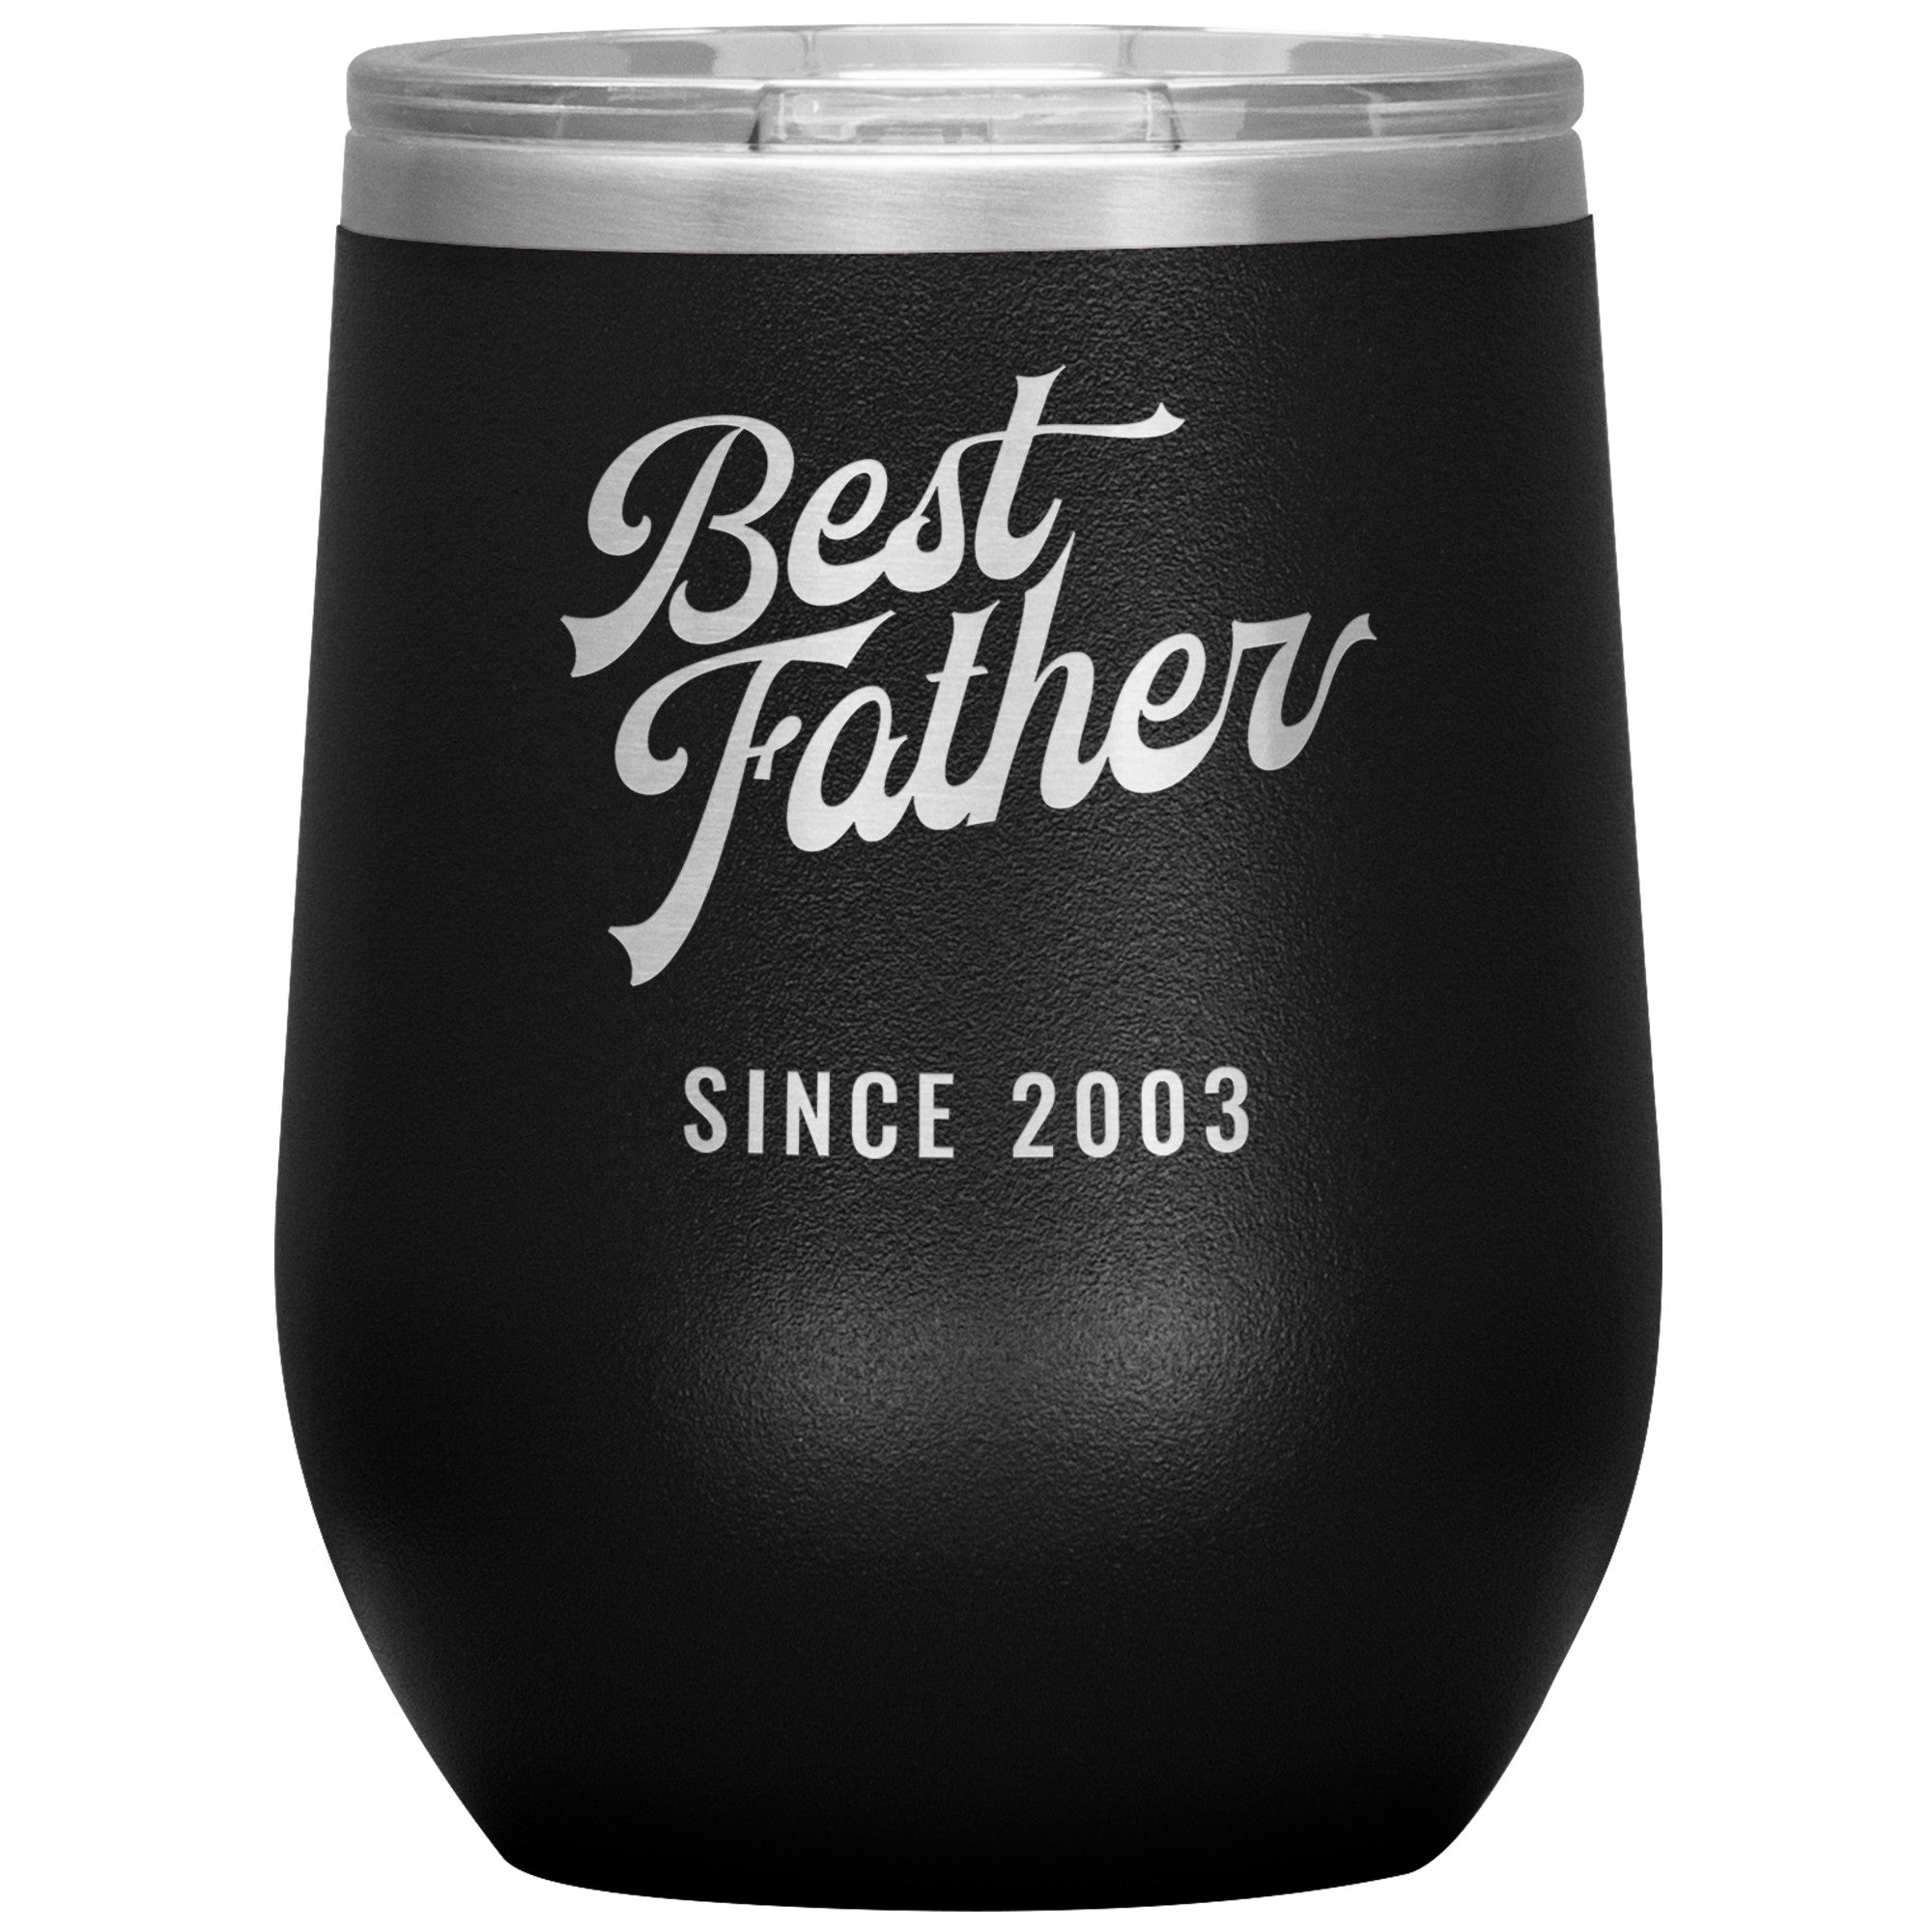 Best Father Since 2003 - 12oz Insulated Wine Tumbler